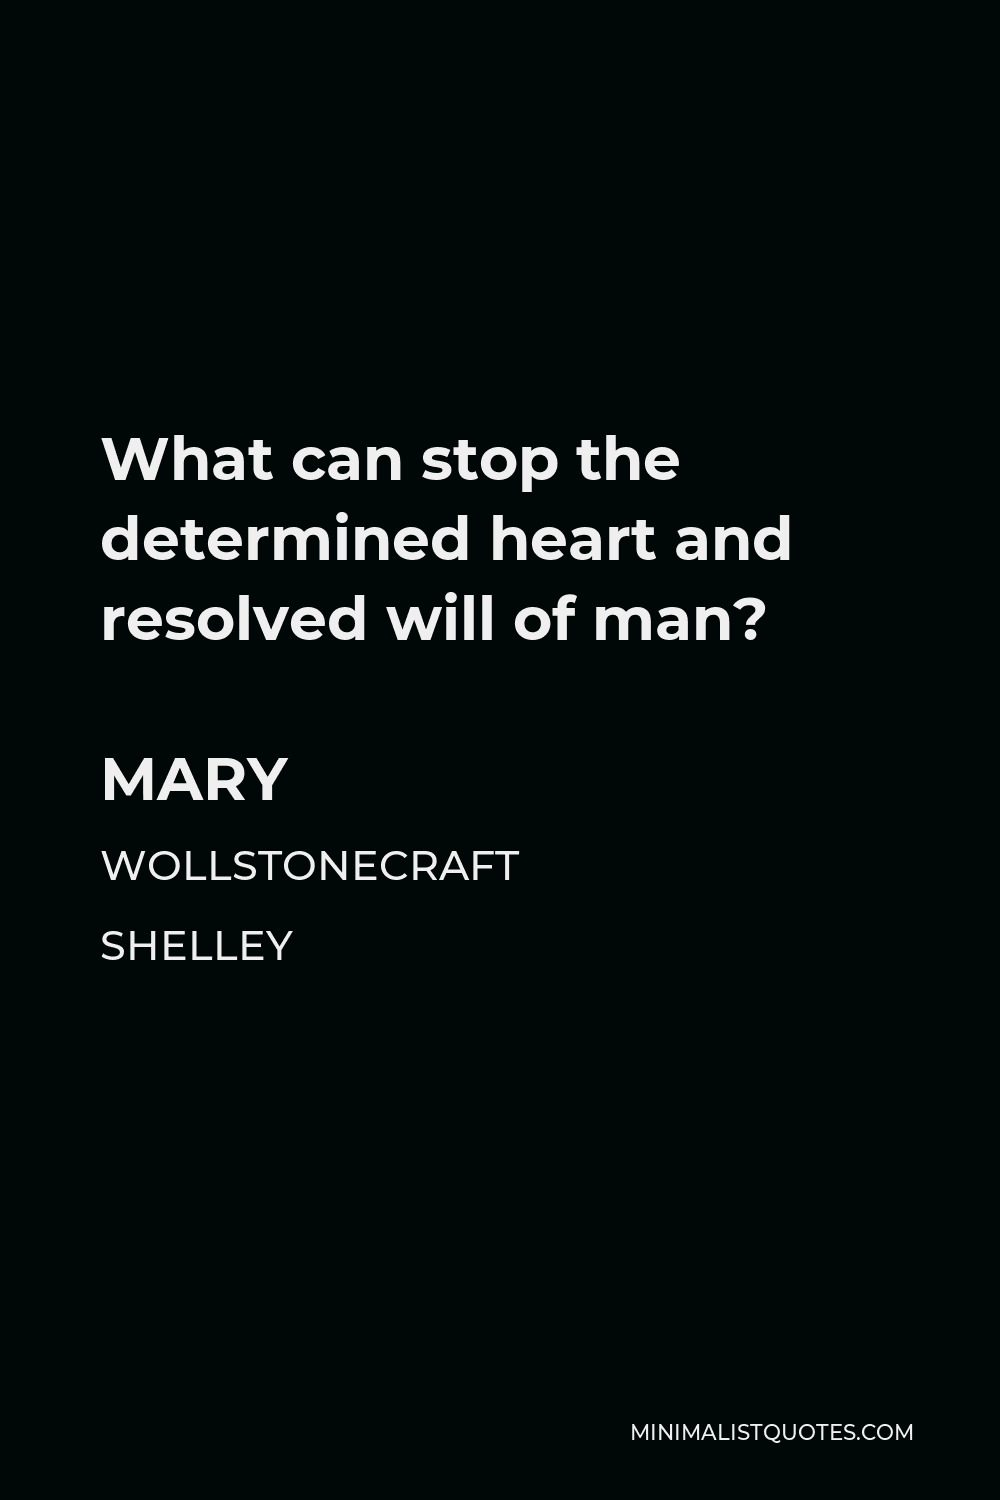 Mary Wollstonecraft Shelley Quote - What can stop the determined heart and resolved will of man?